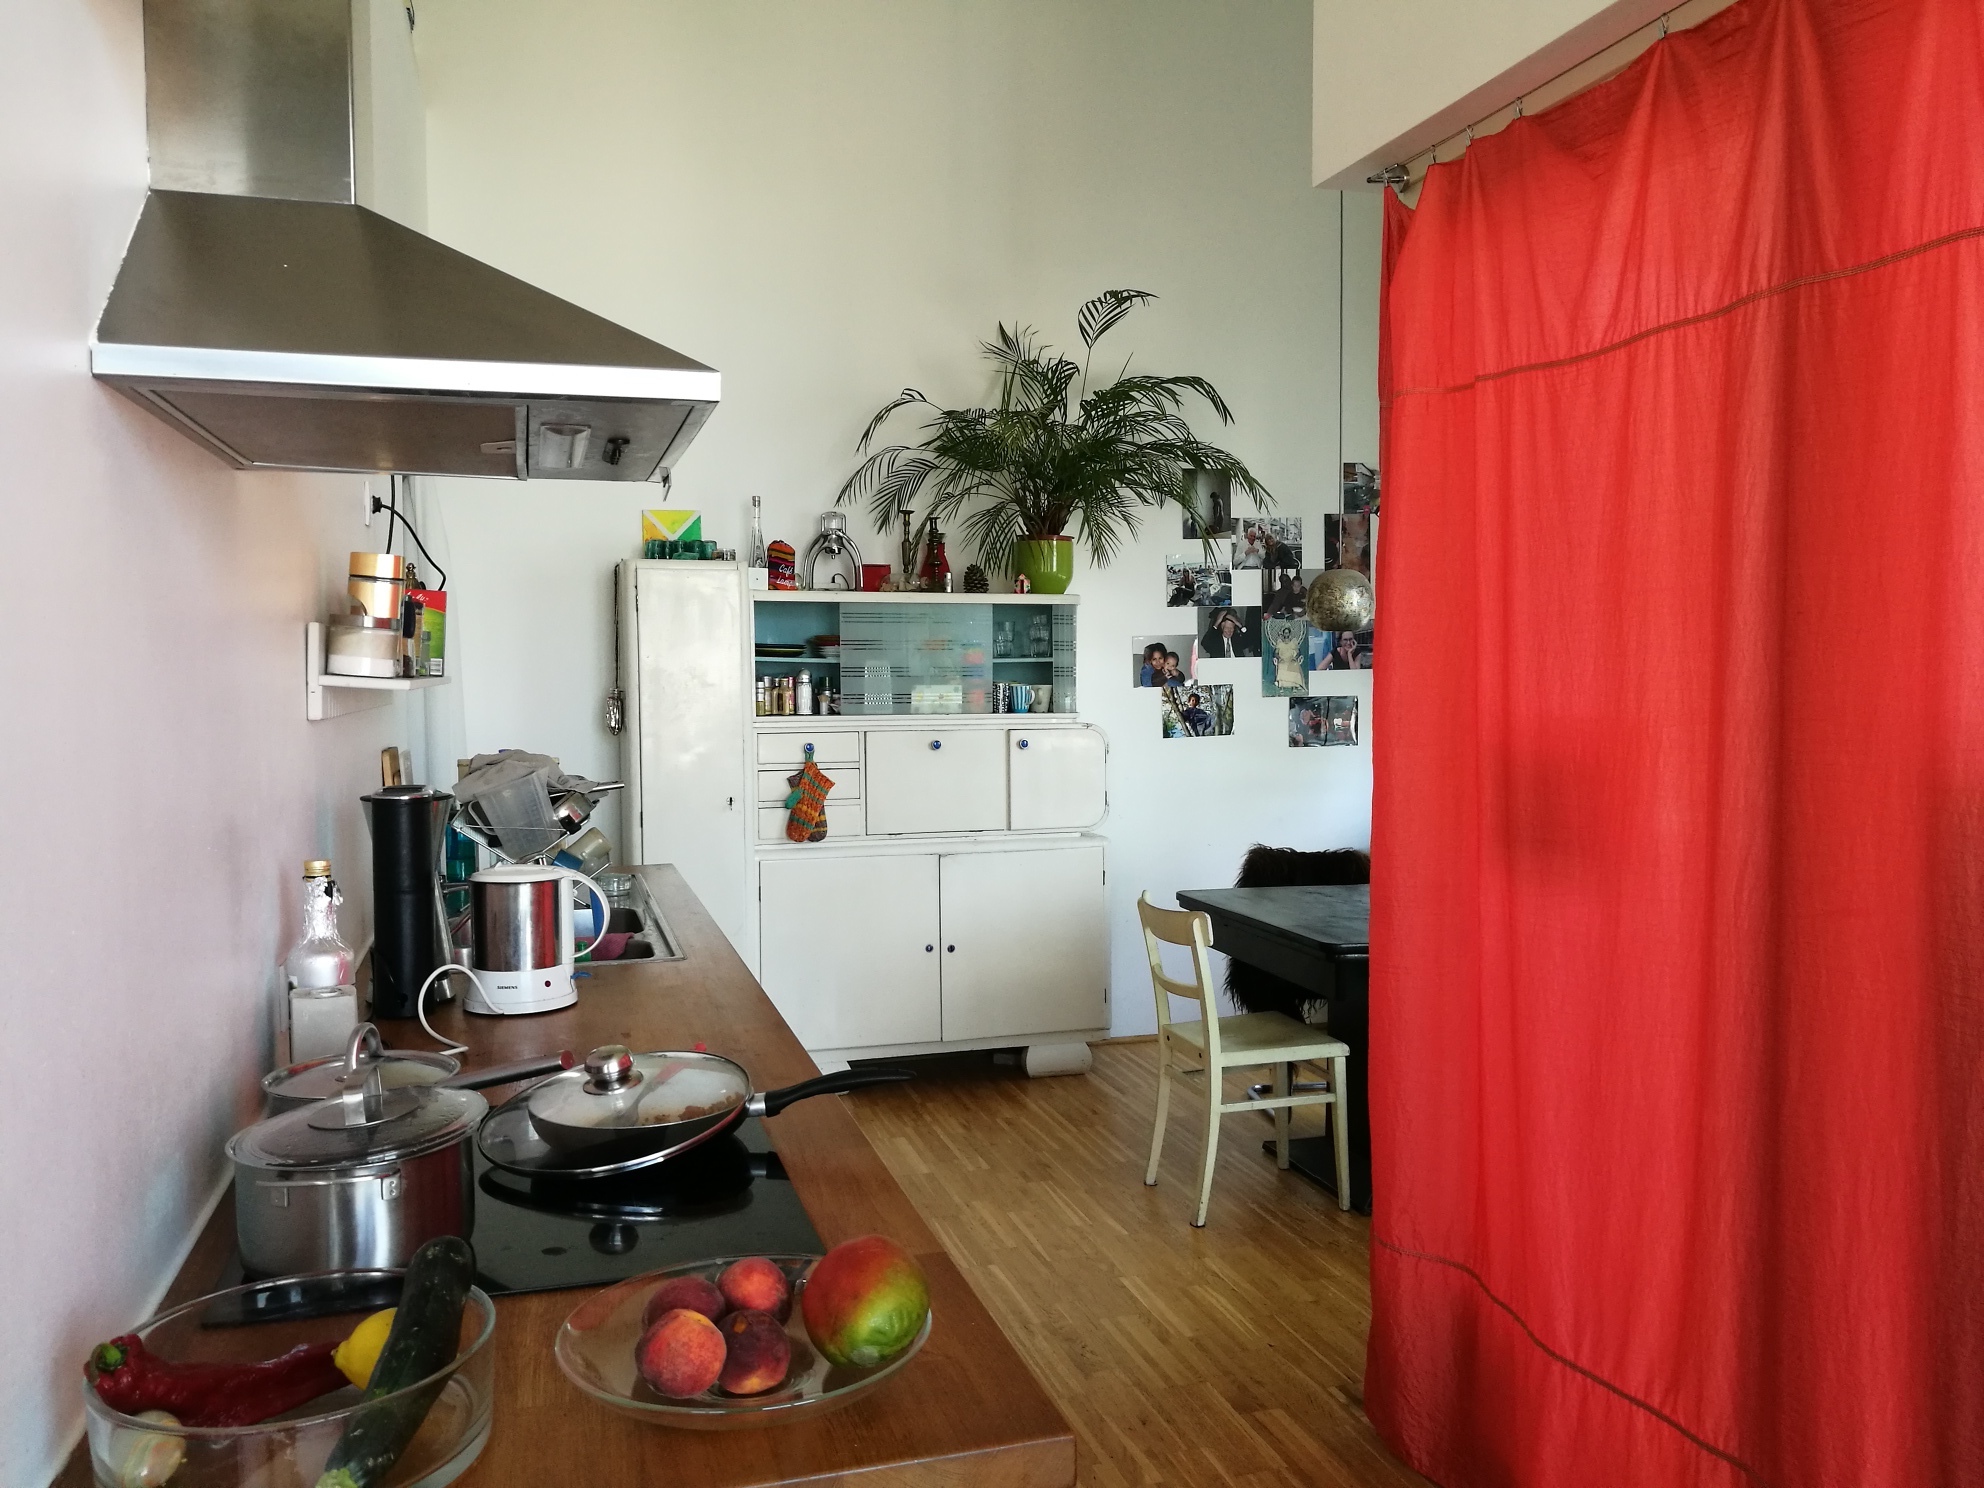 Kitchen with a red curtain